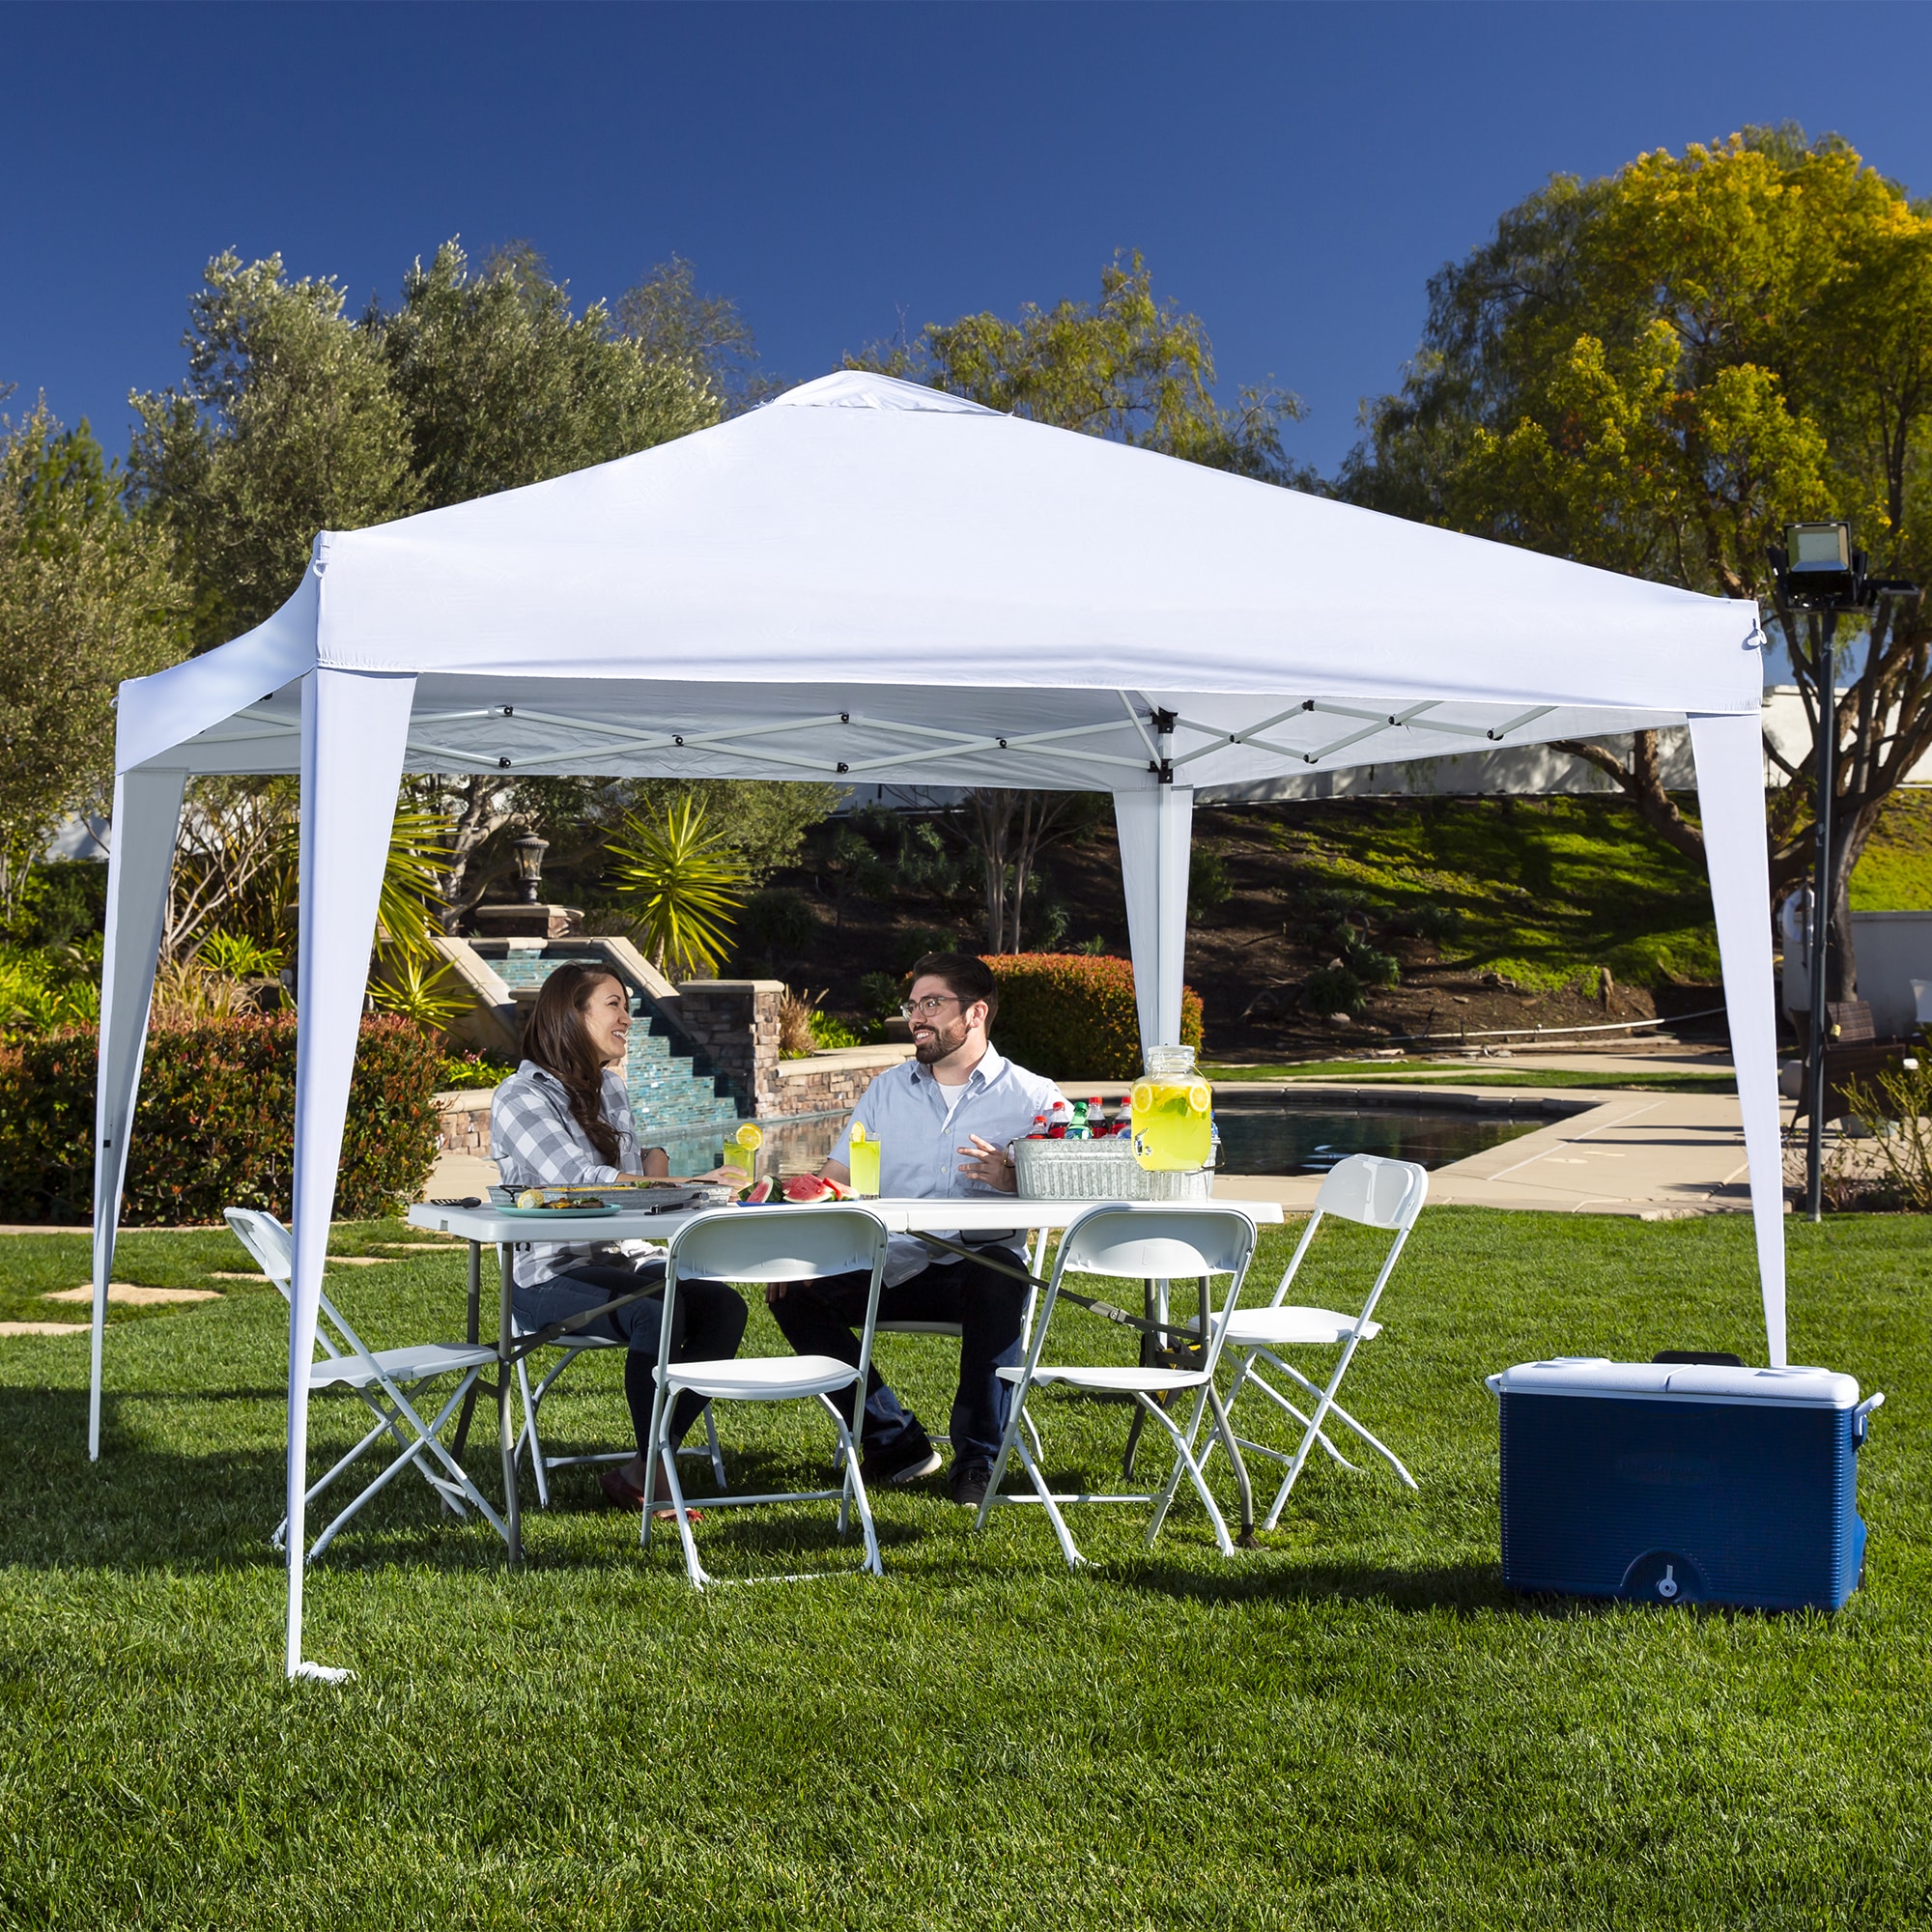 Best Choice Products 10x10ft Pop Up Gazebo Canopy Shade Tent